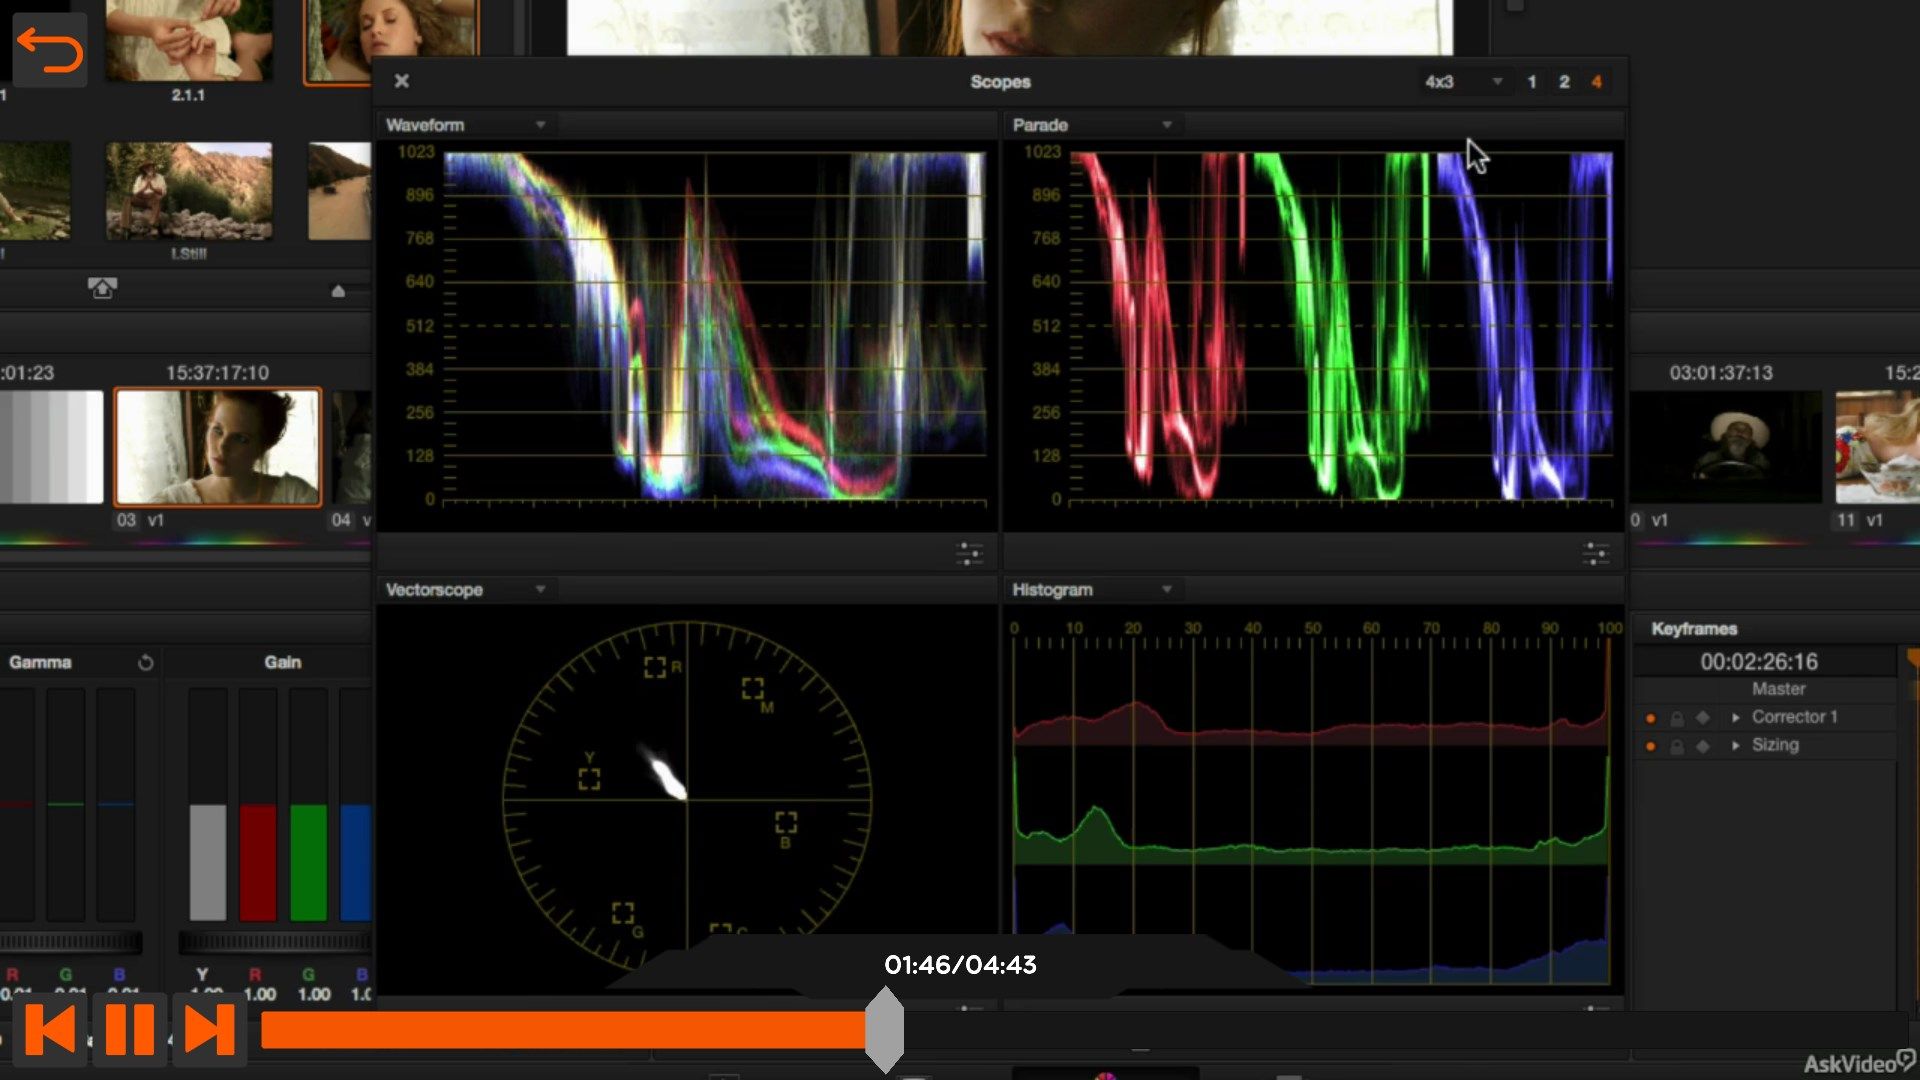 Color Page and Video Scopes in DaVinci Resolve